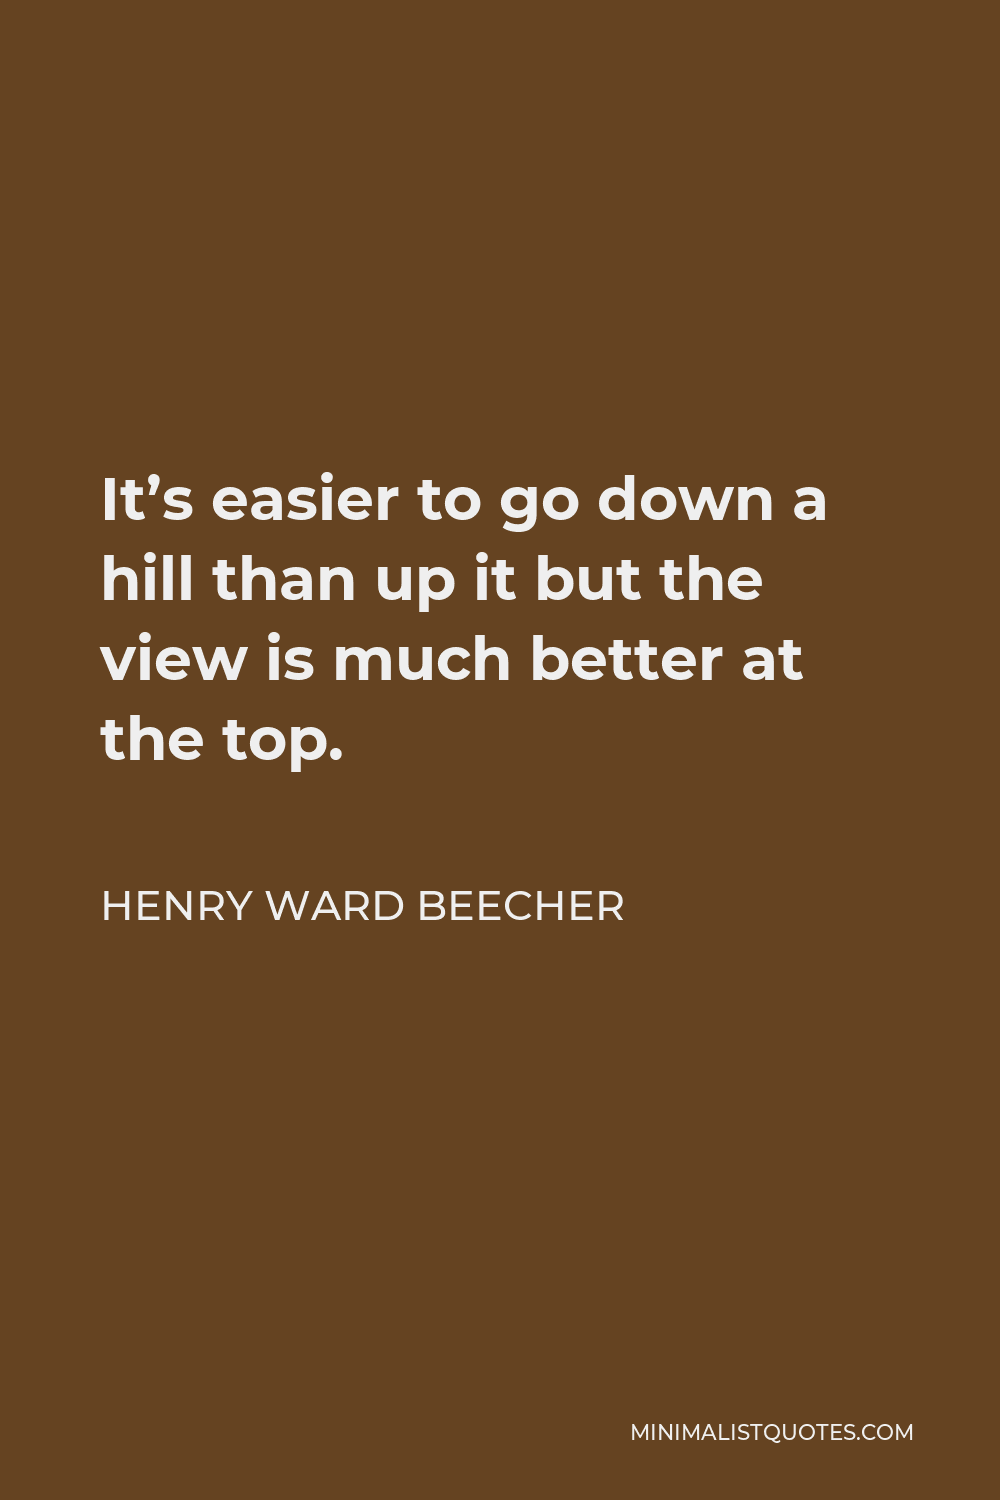 Henry Ward Beecher Quote - It’s easier to go down a hill than up it but the view is much better at the top.